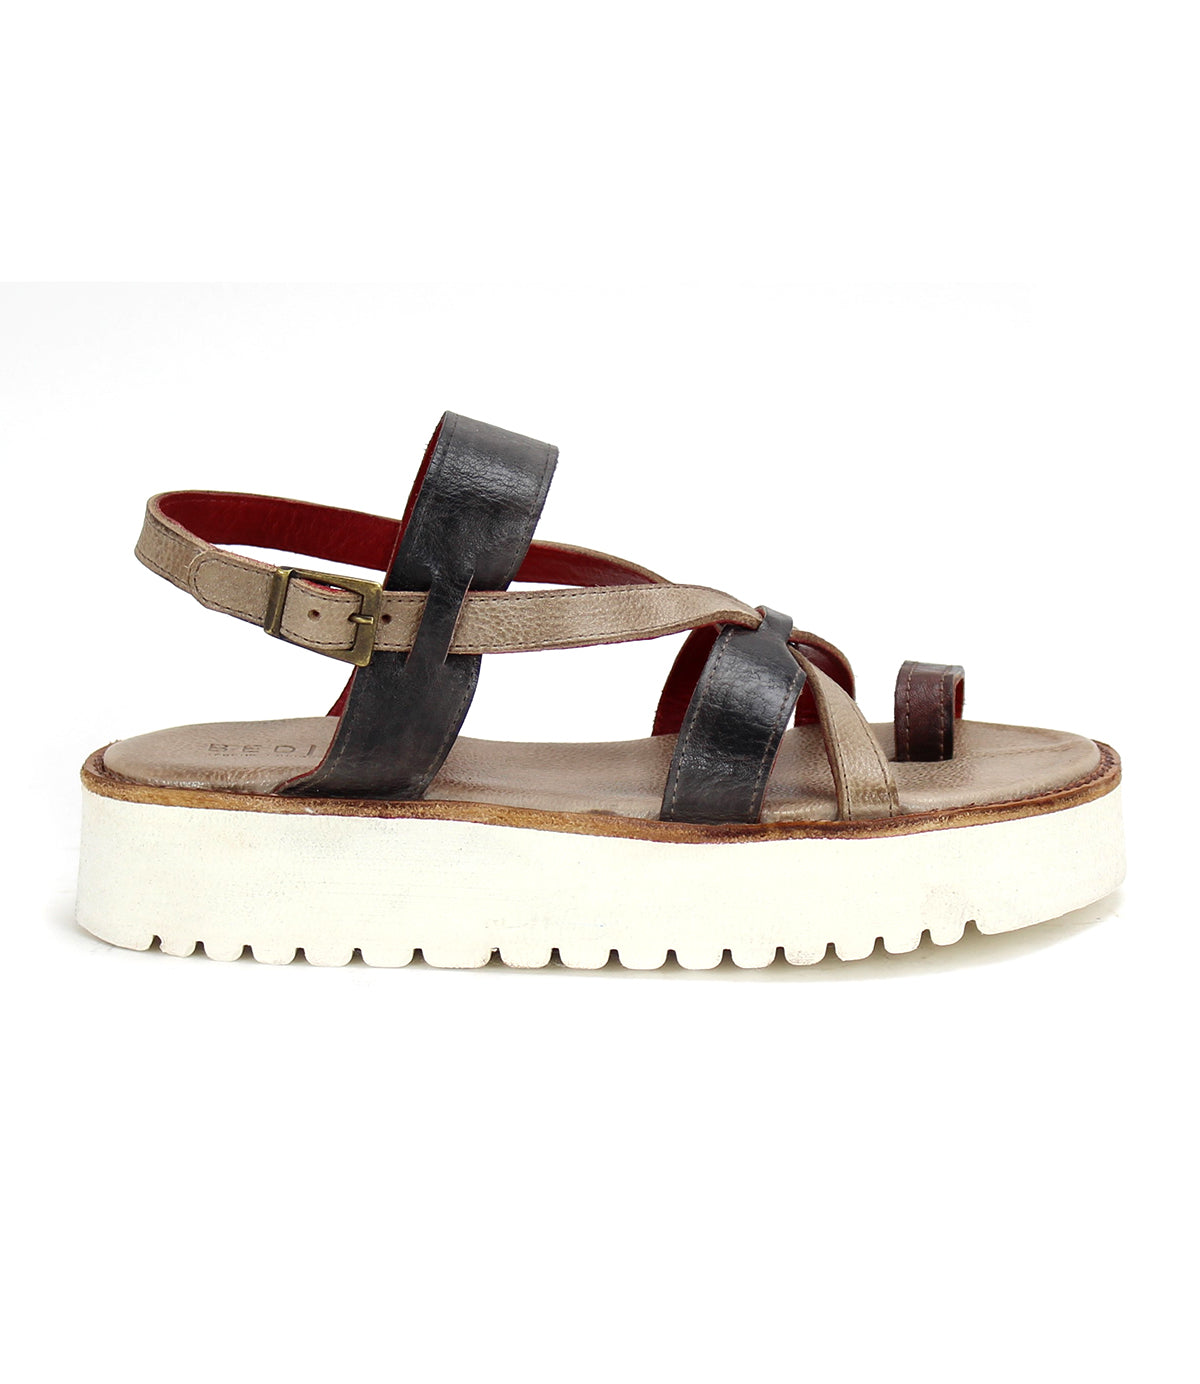 A women's Crawler sandal with a multicolor strappy upper and a Bed Stu XL Extralight® sole.